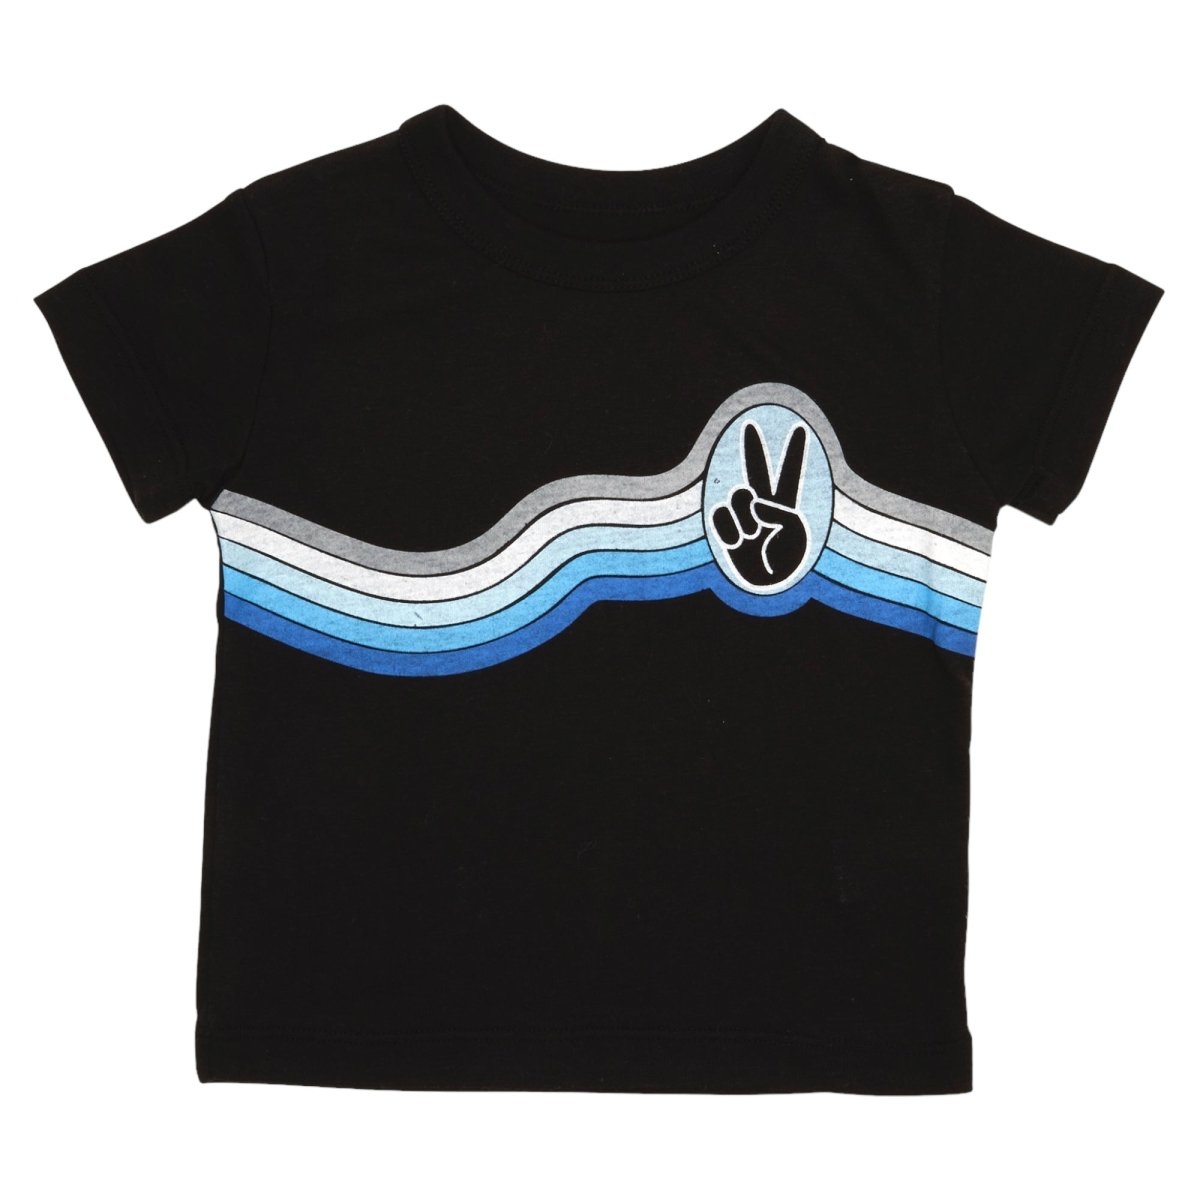 PEACE SIGN STRIPE TSHIRT - CHASER KIDS